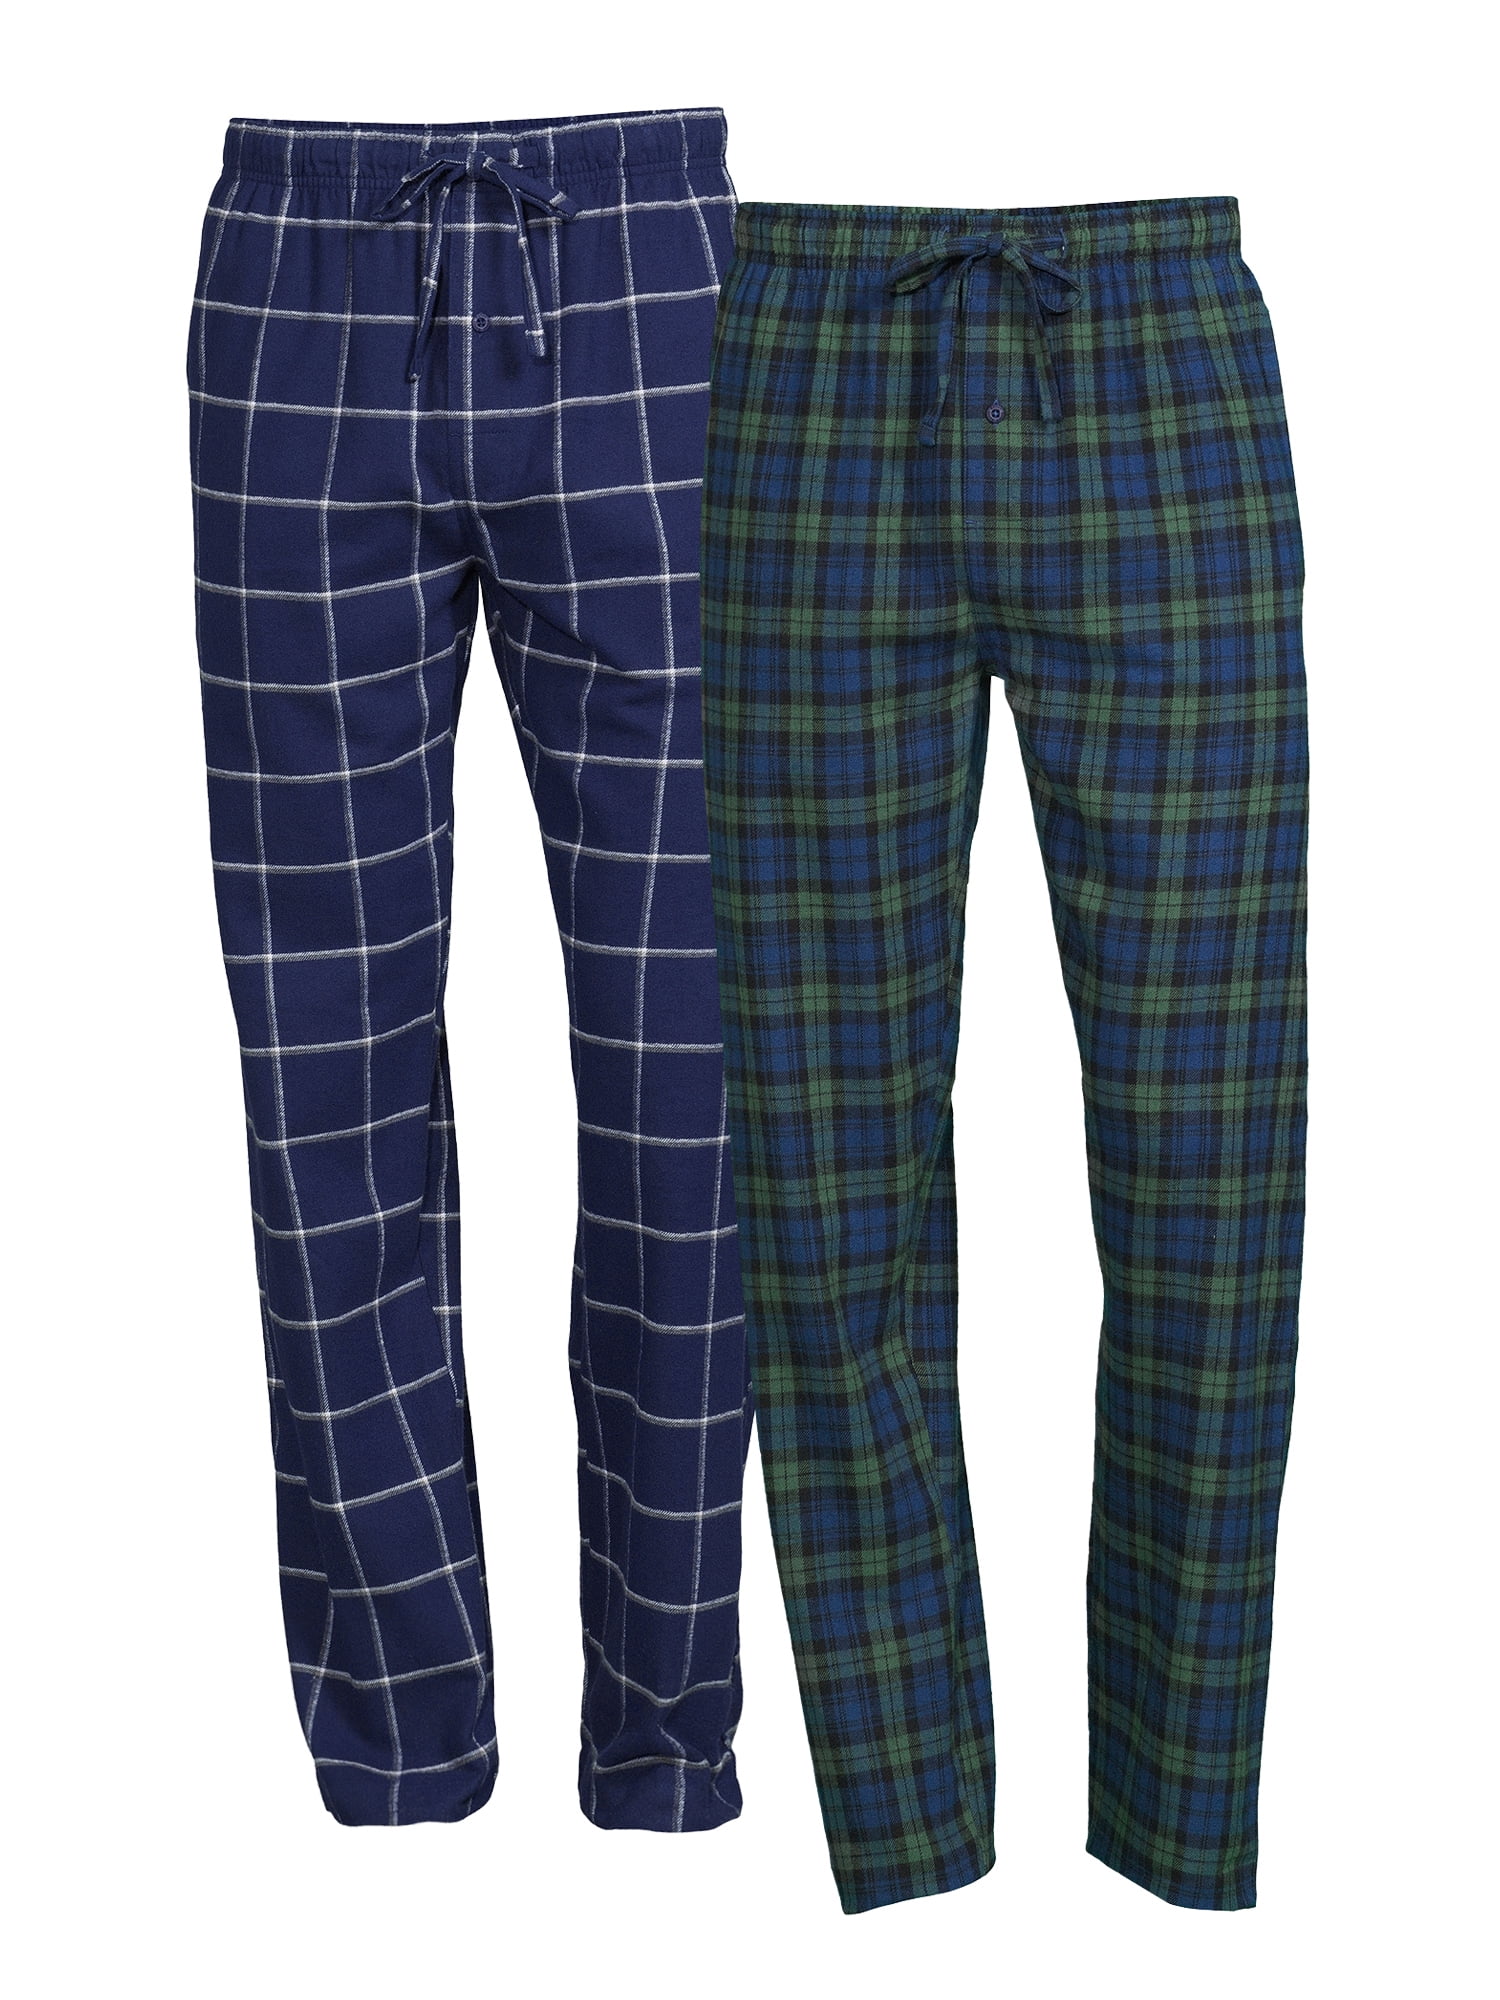 8 COLOR CHOICES Hanes Men's Jersey Flannel Lounge Pants w/Pockets & Drawstring 